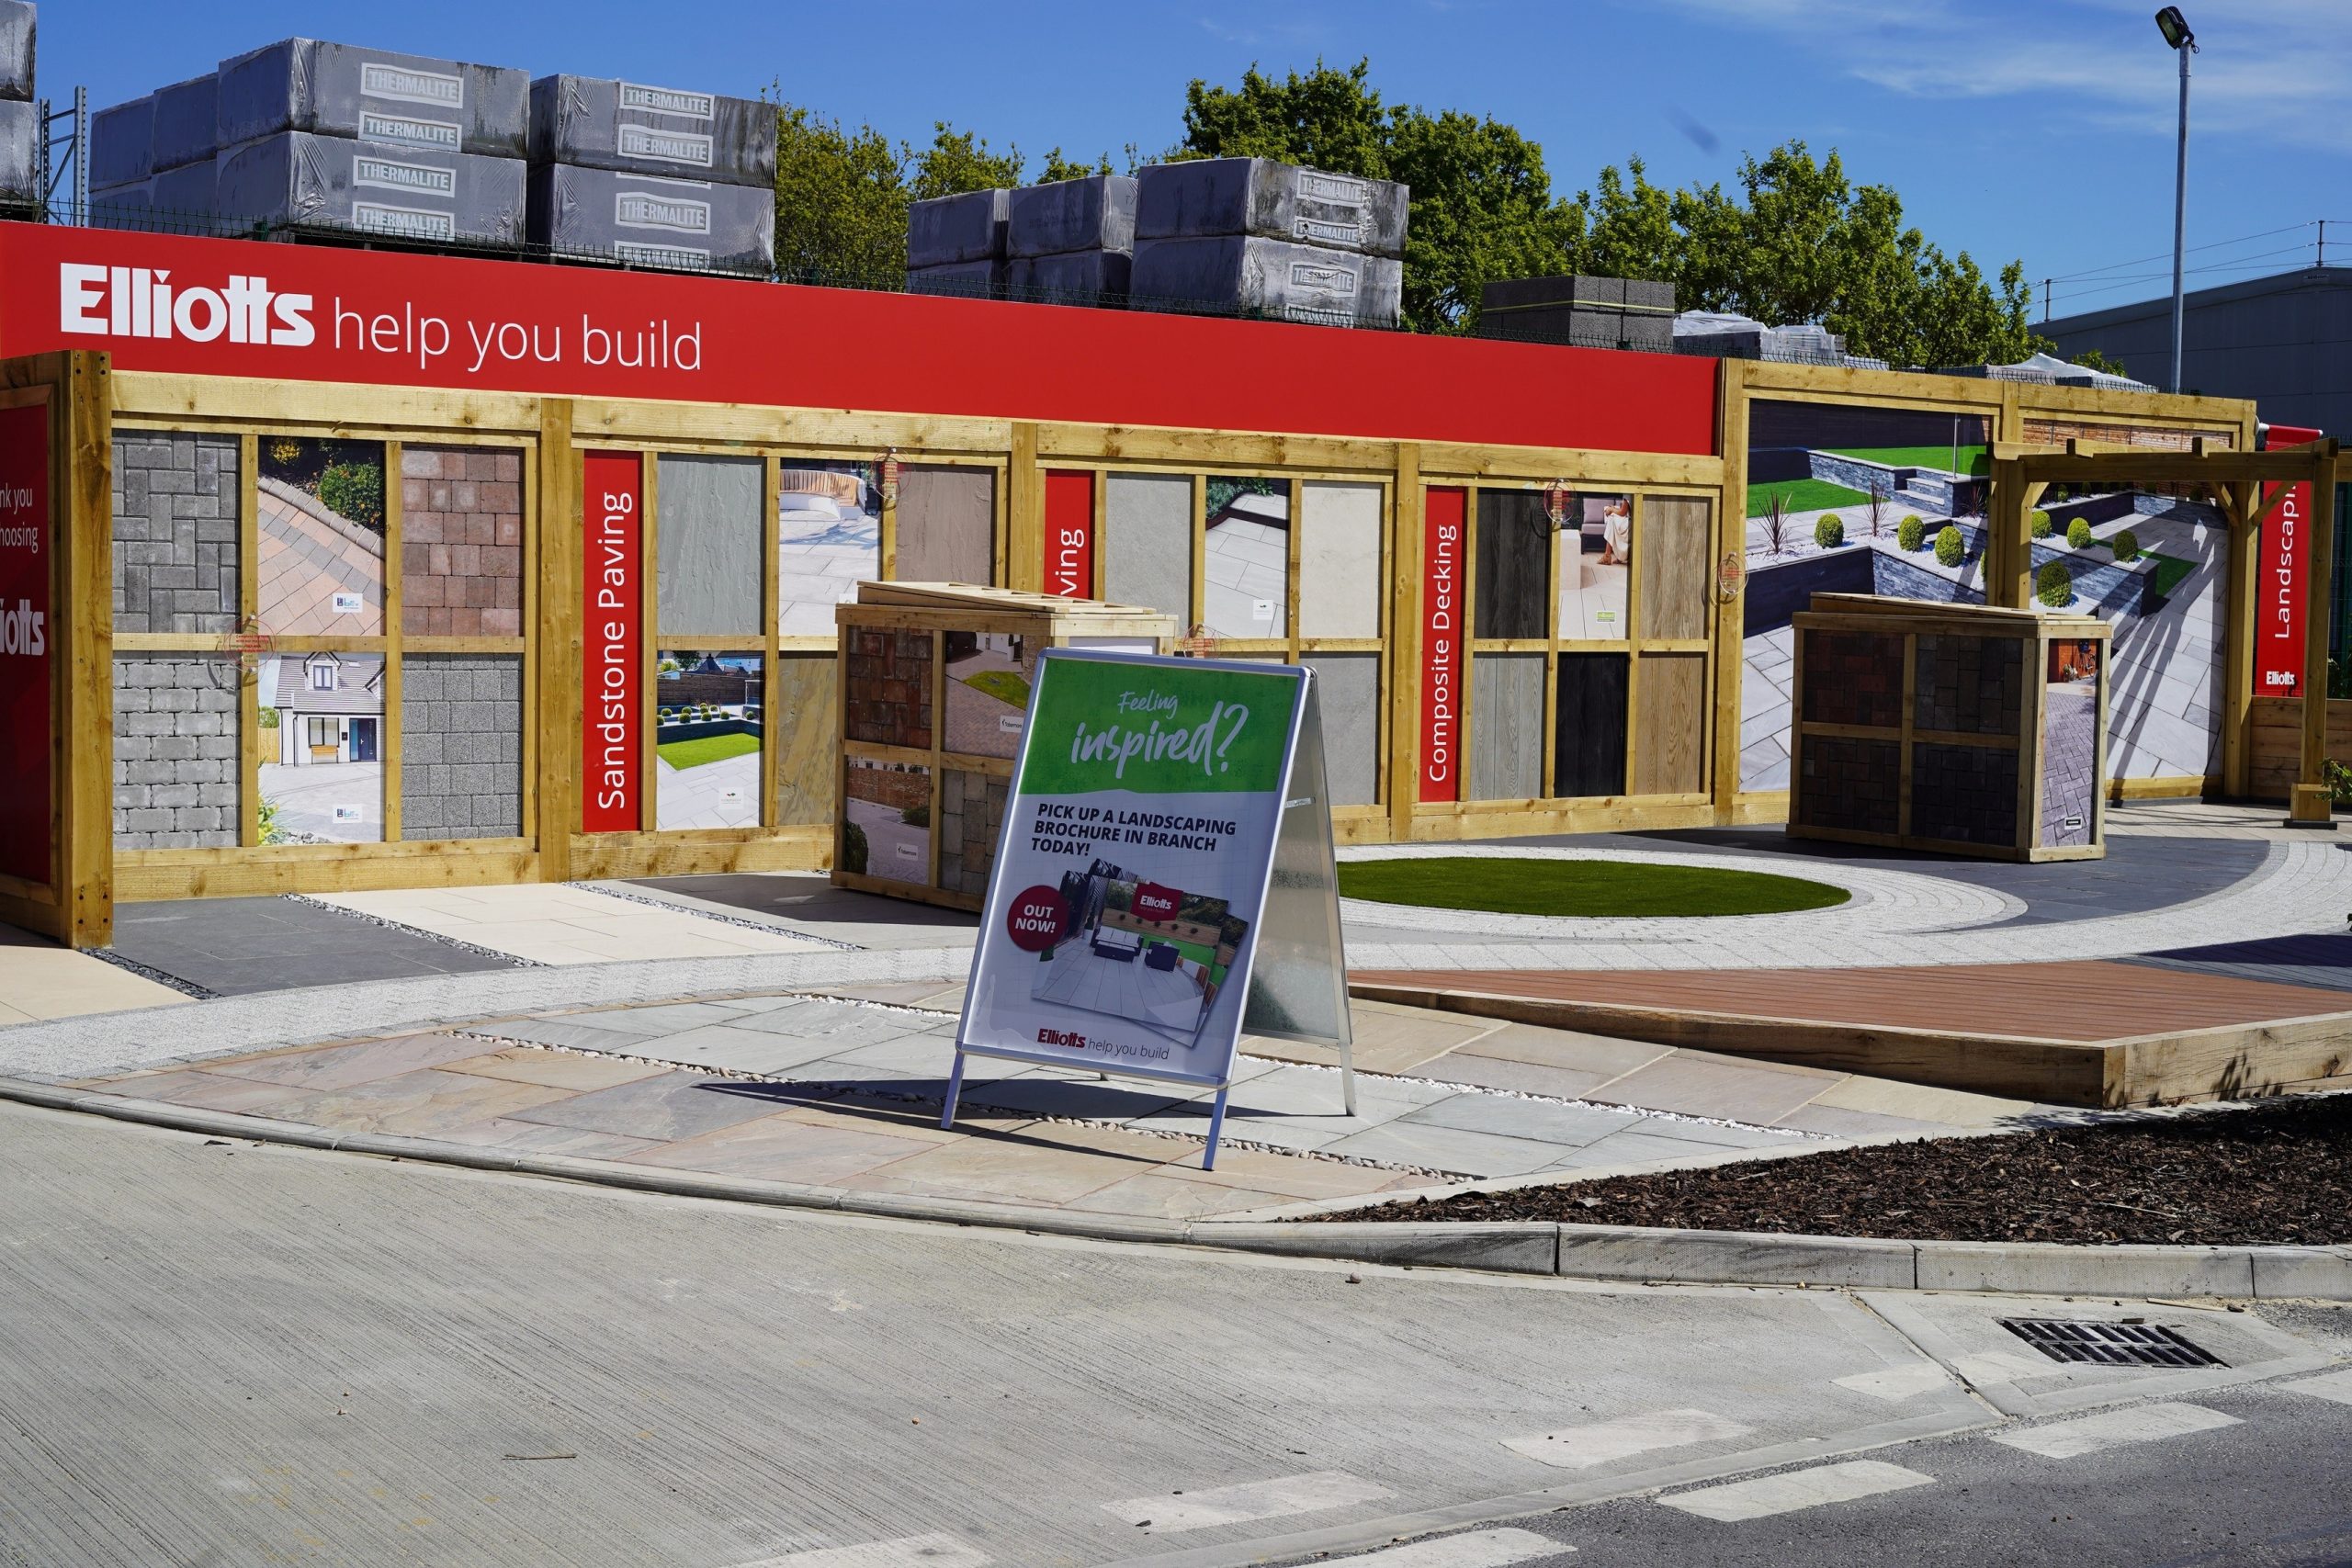 Having converted a previously underused space, Elliotts has now opened a stunning new landscaping display area at its Lymington branch.